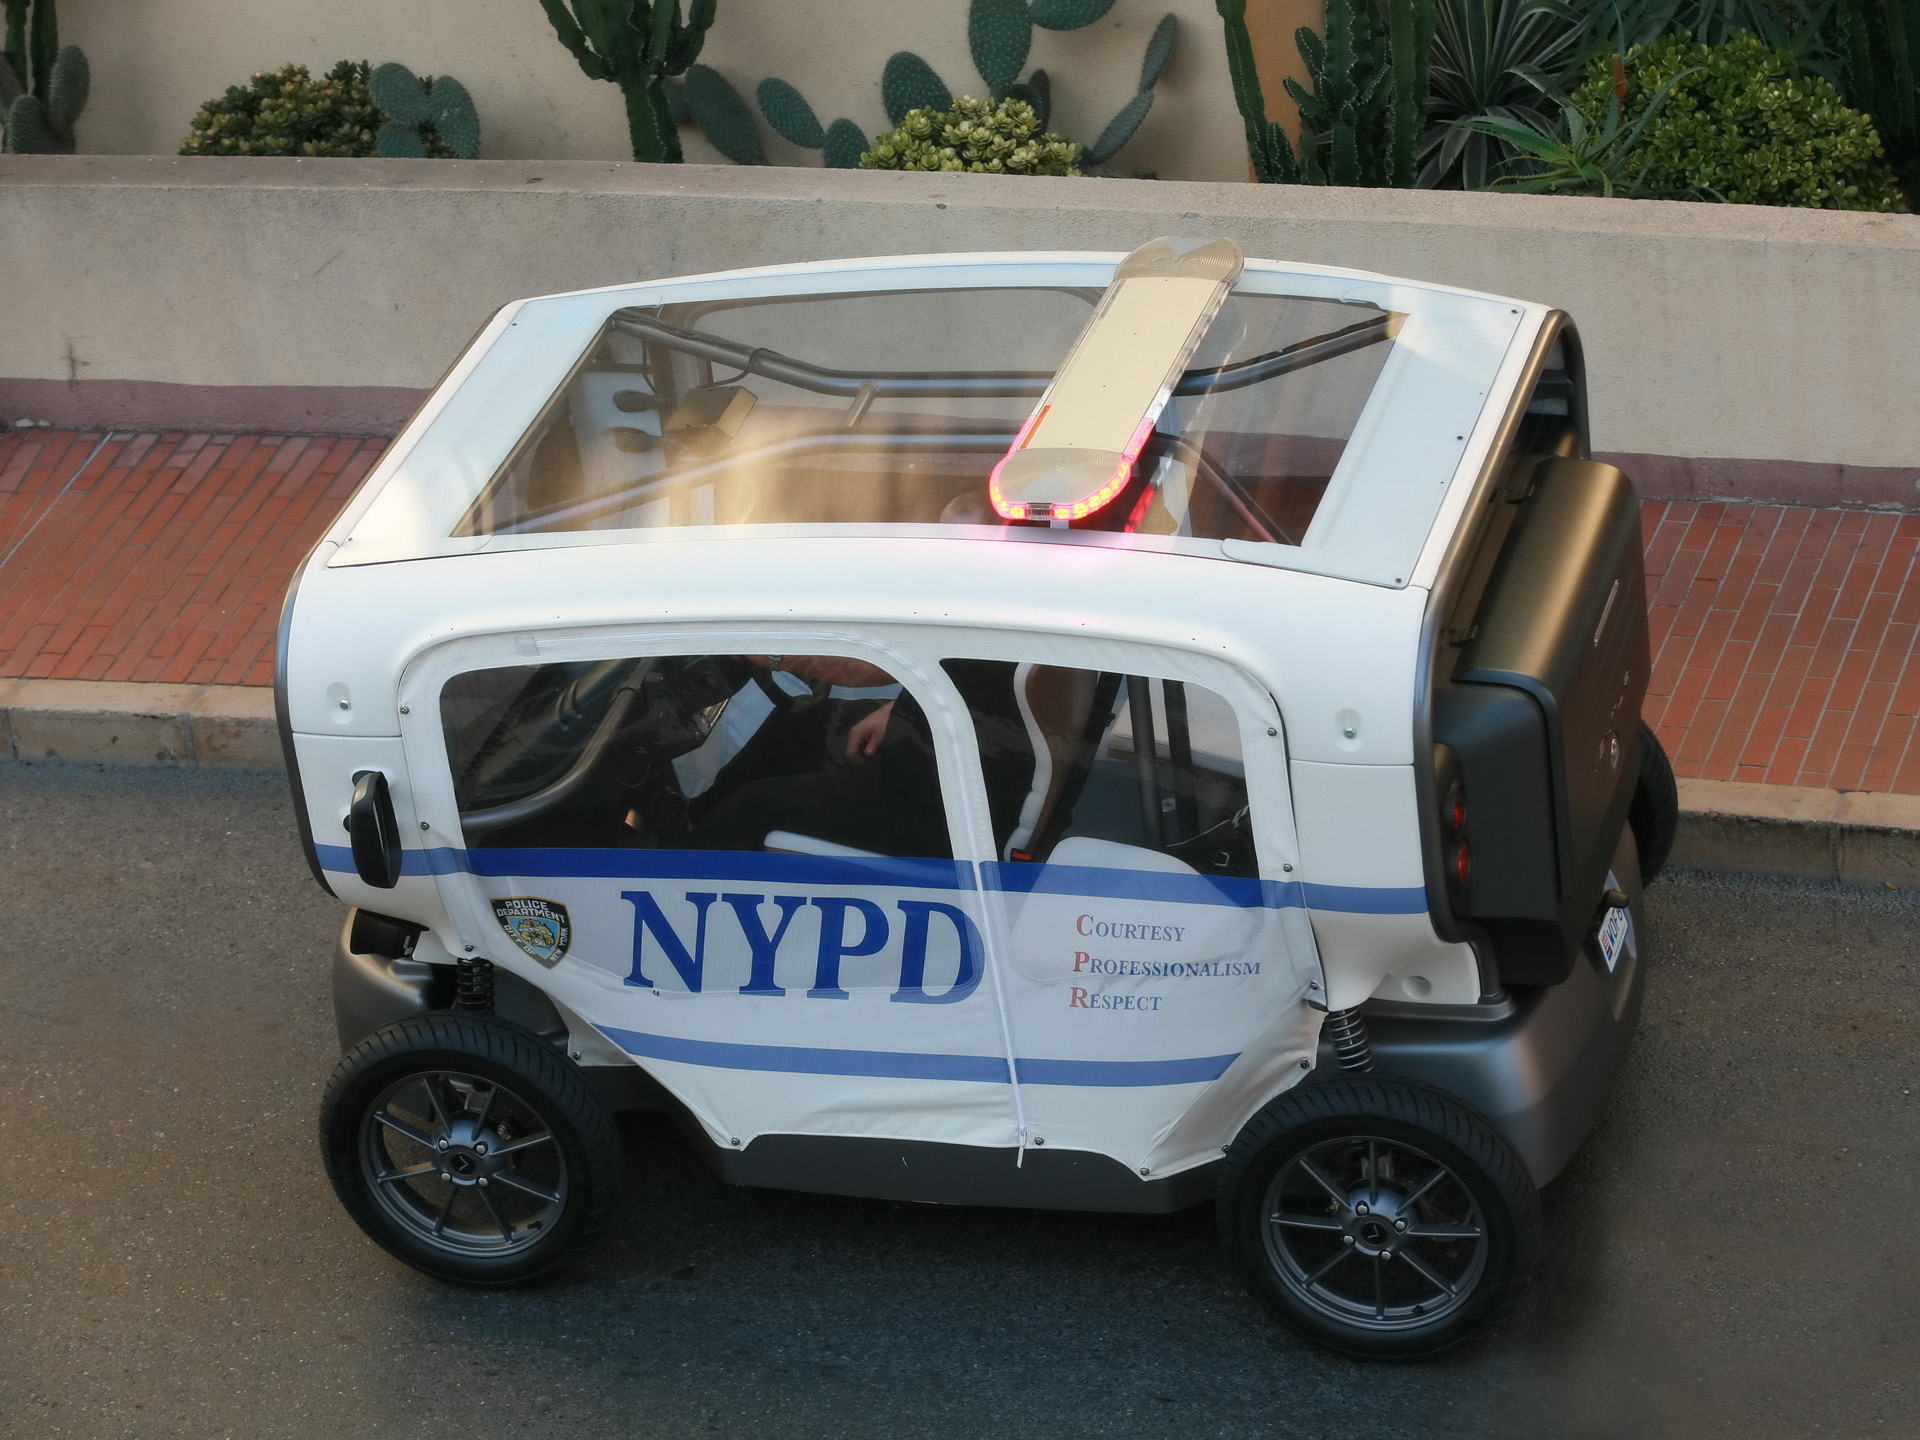 2008, Venturi, Eclectic, Concept, Nypd, Police, Electric Wallpaper